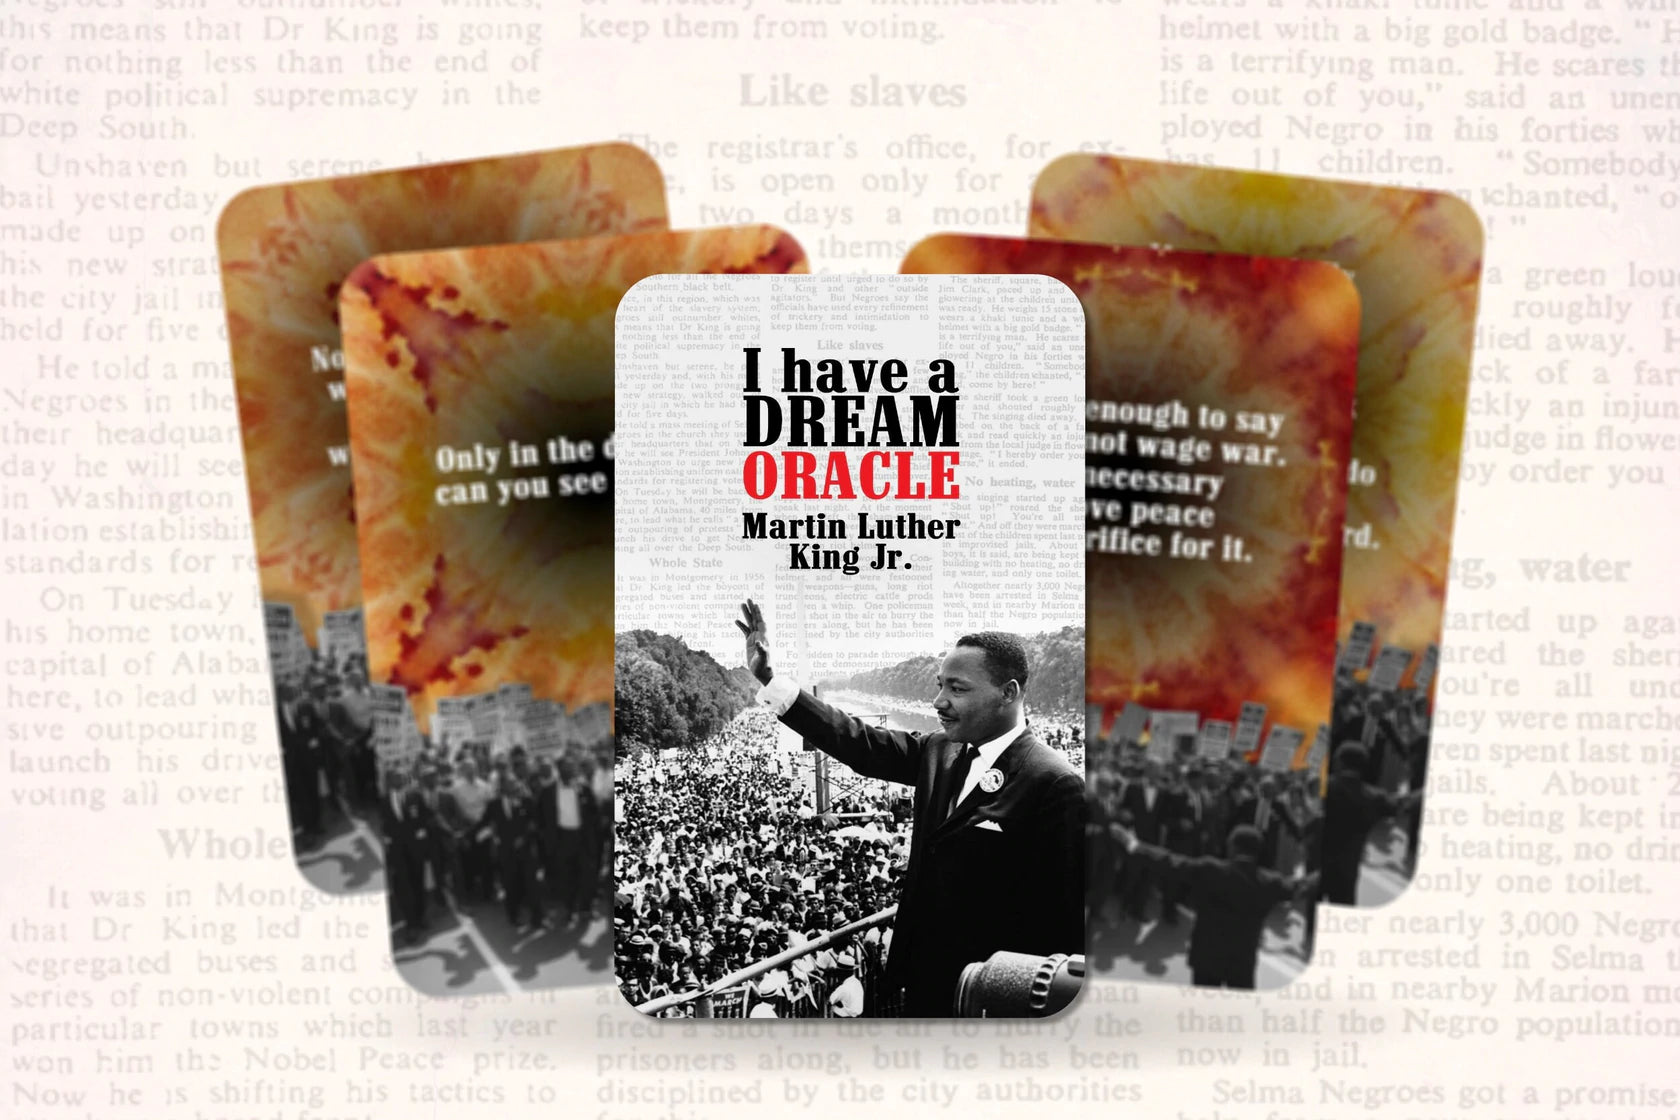 I have a DREAM Oracle- Martin Luther King Jr. yoga smokes yoga studio, delivery, delivery near me, yoga smokes smoke shop, find smoke shop, head shop near me, yoga studio, headshop, head shop, local smoke shop, psl, psl smoke shop, smoke shop, smokeshop, yoga, yoga studio, dispensary, local dispensary, smokeshop near me, port saint lucie, florida, port st lucie, lounge, life, highlife, love, stoned, highsociety. Yoga Smokes